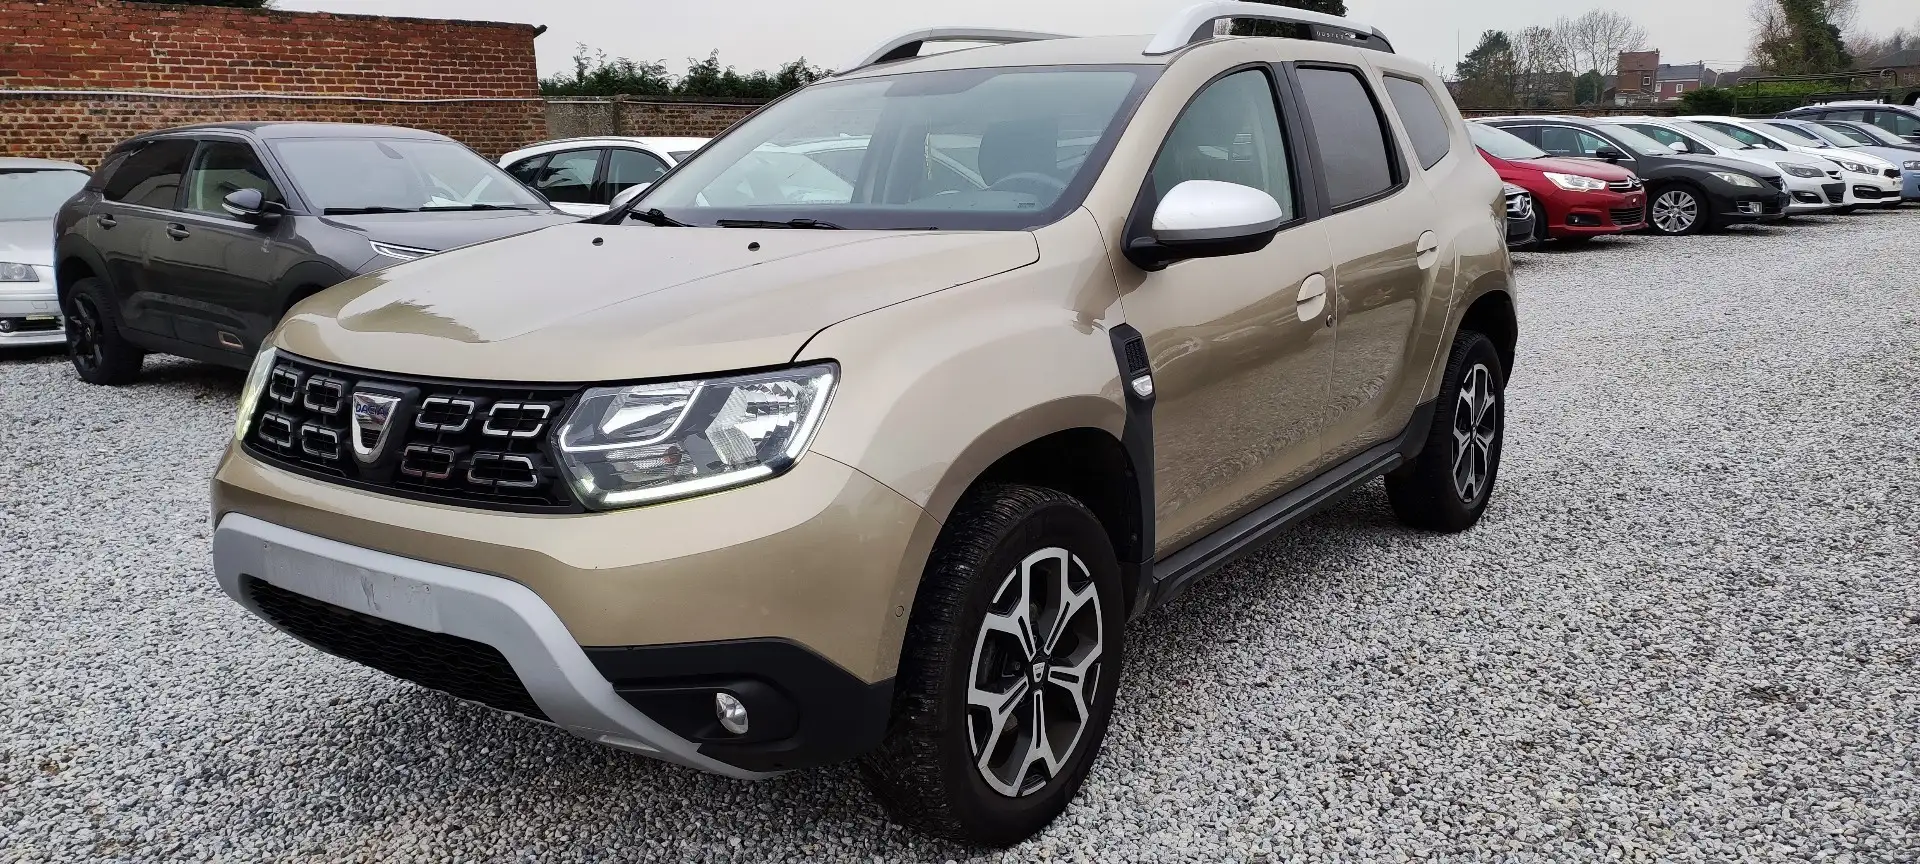 Dacia Duster 1.4 i TCe (130CH)_4x2 💢Faible Km_EURO 6D💢 Beżowy - 1